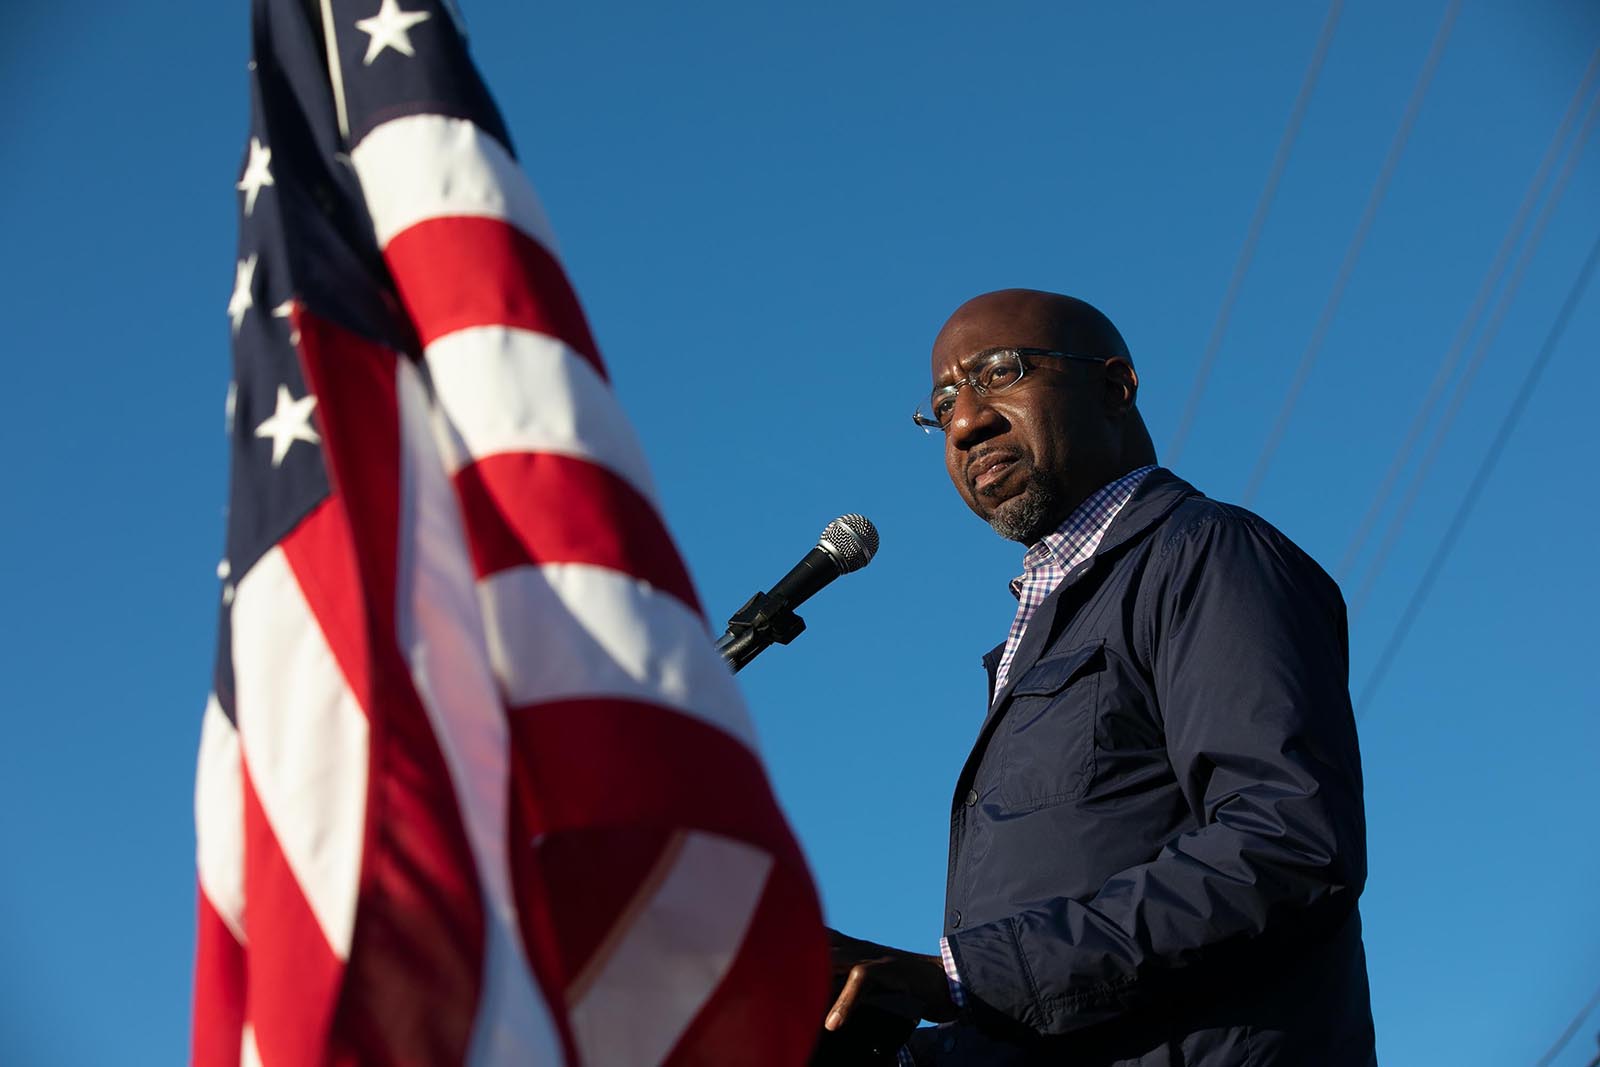 Senate candidate Raphael Warnock of Georgia speaks to supporters during a rally on November 15 in Marietta, Georgia.